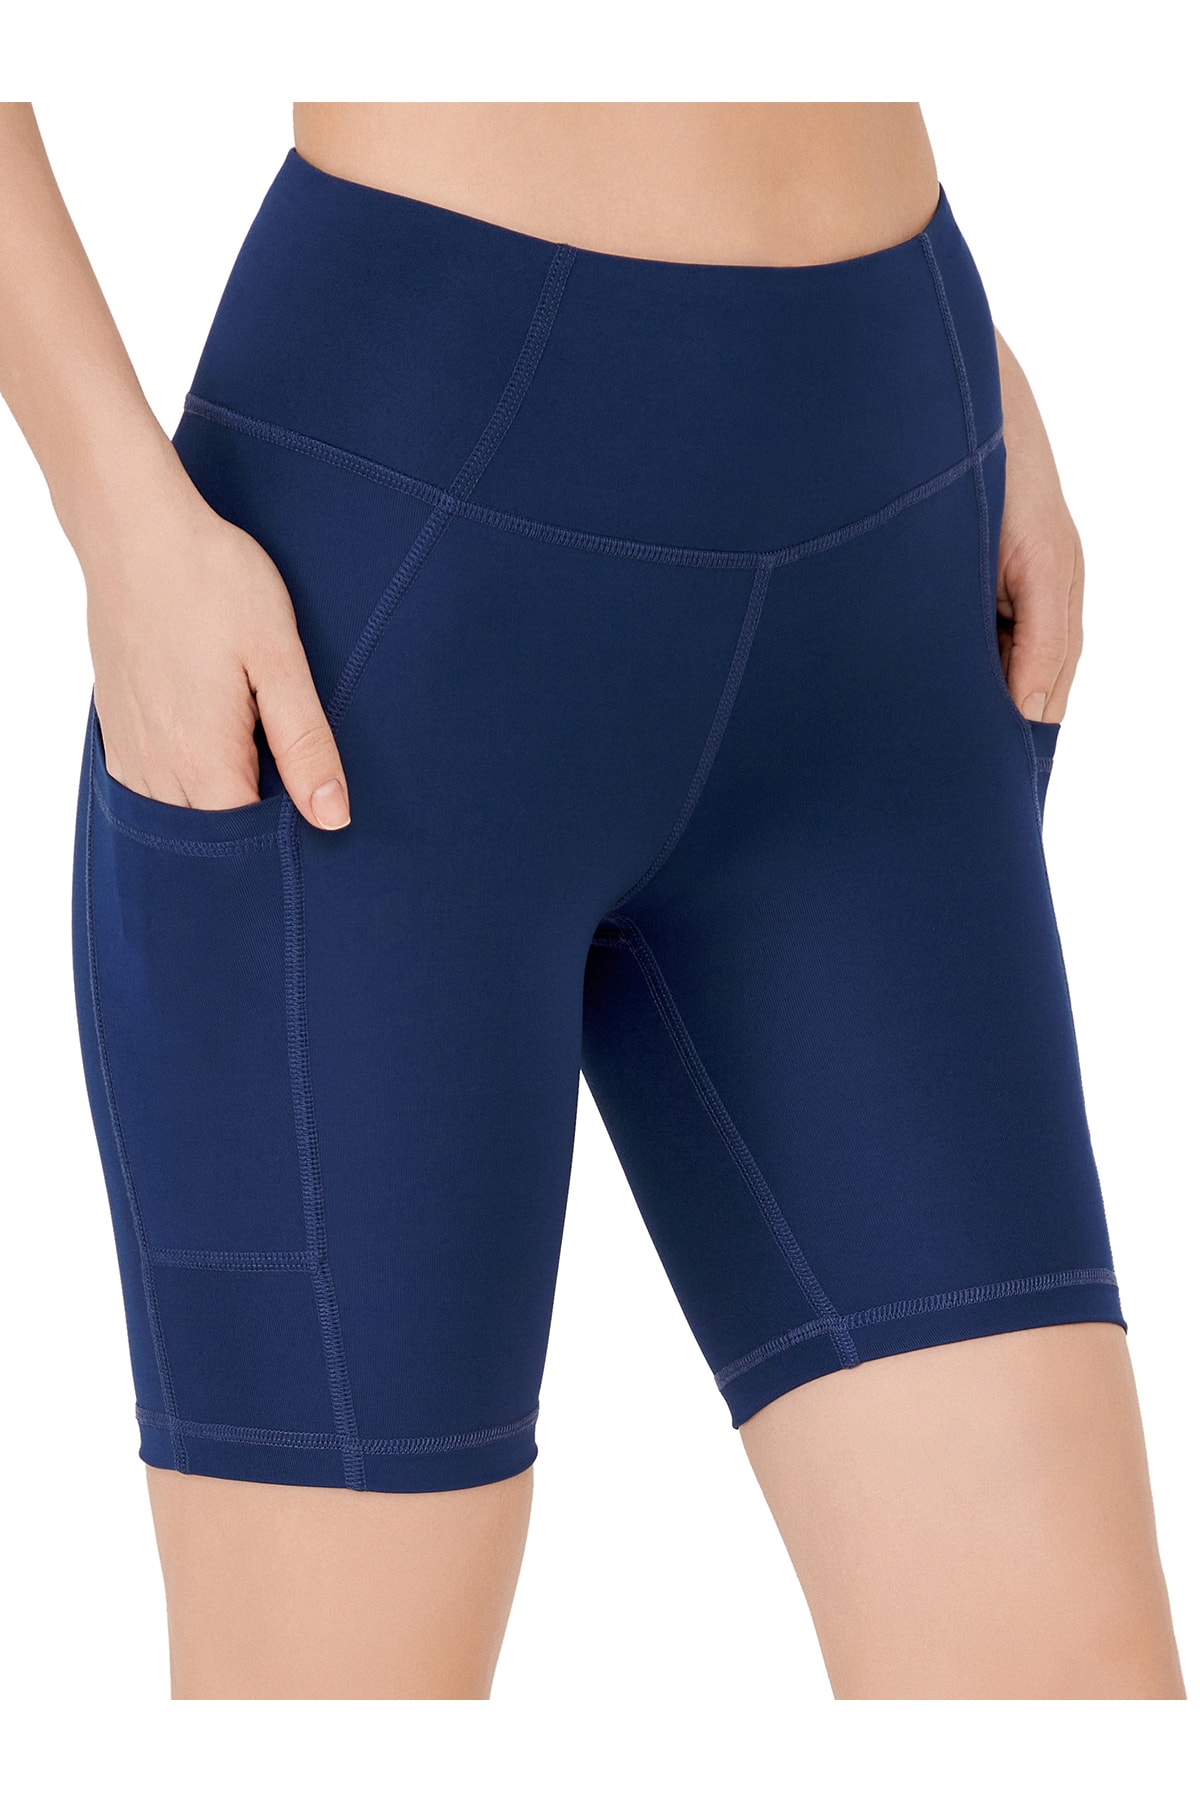 LOS OJOS Women's Navy Blue High Waist Compression Double Pocket